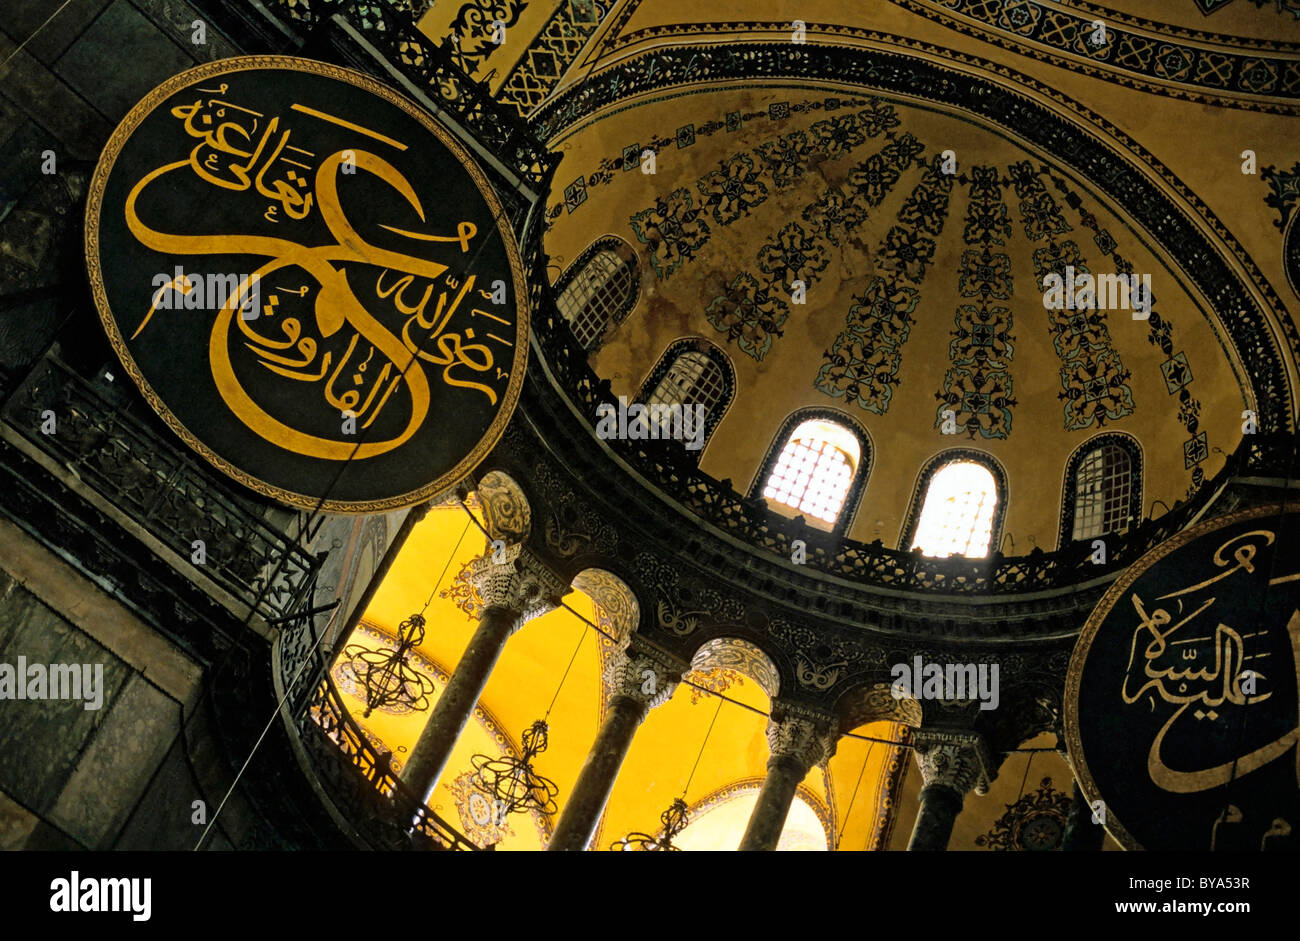 Dome and columns inside Hagia Sophia (once a basilica, then a mosque and now a museum), Istanbul, Turkey. Stock Photo